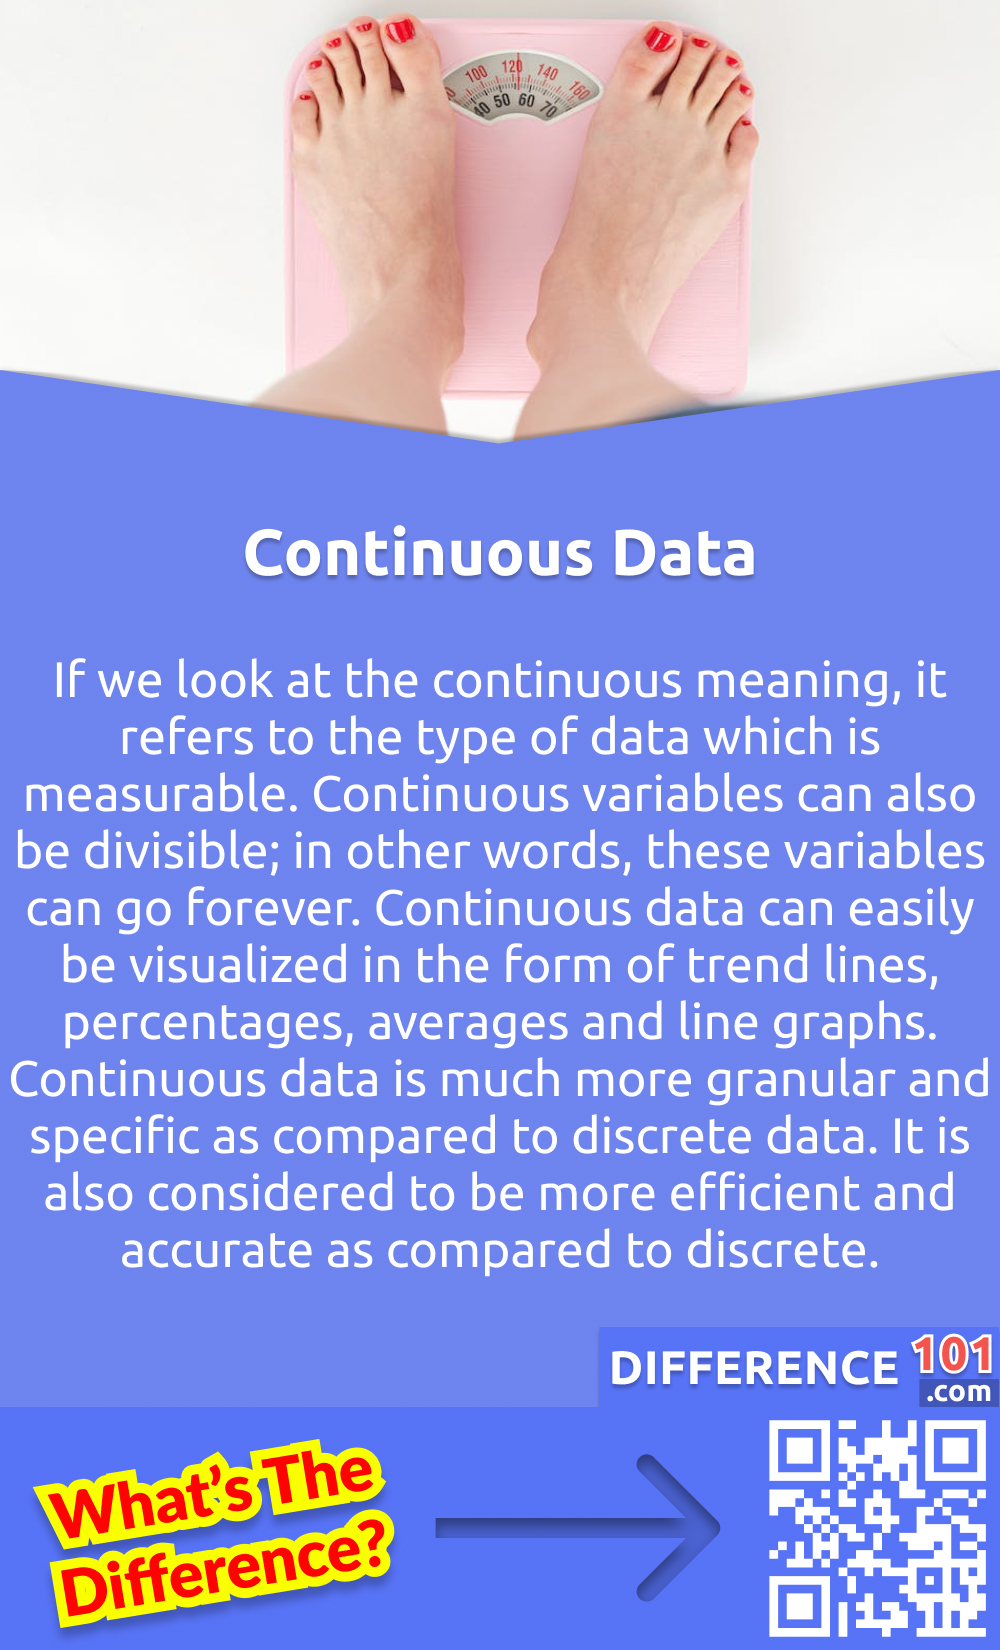 What Is Continuous Data? If we look at the continuous meaning, it refers to the type of data which is measurable. Continuous variables can also be divisible; in other words, these variables can go forever. Continuous data can easily be visualized in the form of trend lines, percentages, averages and line graphs. Continuous data is much more granular and specific as compared to discrete data. It is also considered to be more efficient and accurate as compared to discrete. The detailed physical measurement of continuous data like weight can be obtained from measurement tools. Analytics tools can also be helpful in providing more detail. Continuous data can be used in many different ways. For example, industrial and commercial use cases depend on accuracy to maximize efficiency.